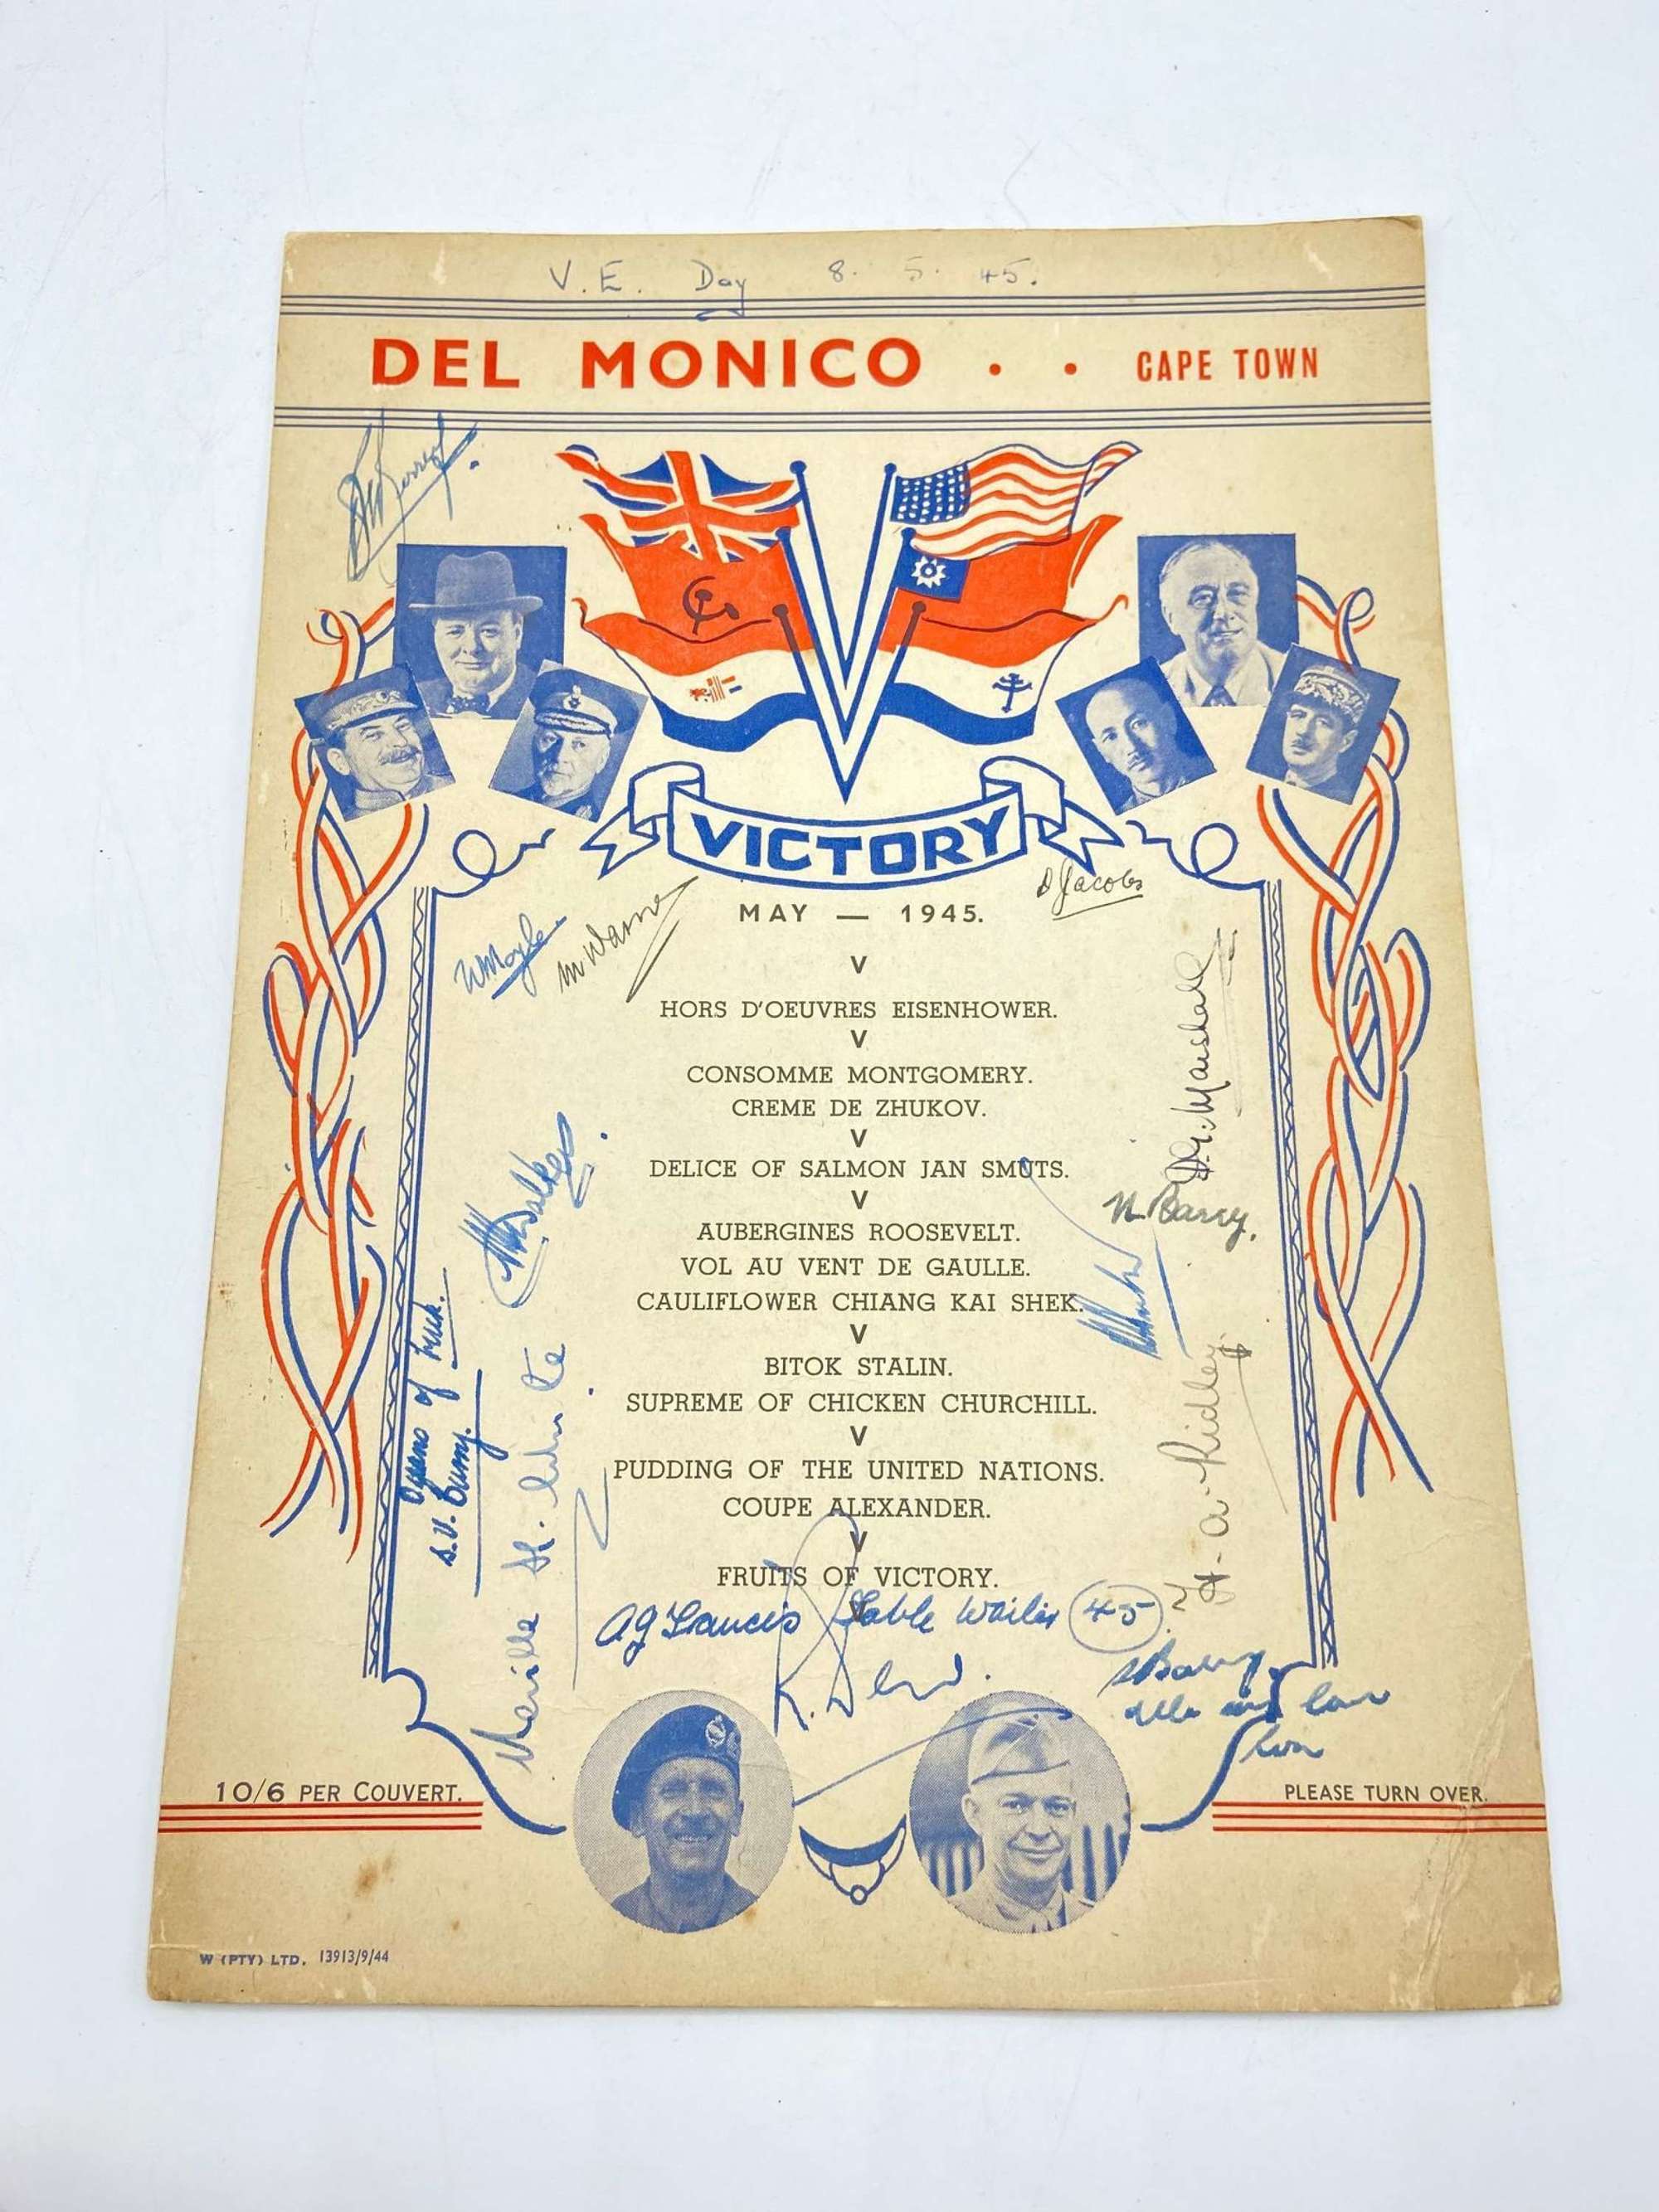 WW2 South African Cape Town Victory Day Del Monico Signed Satire Menu